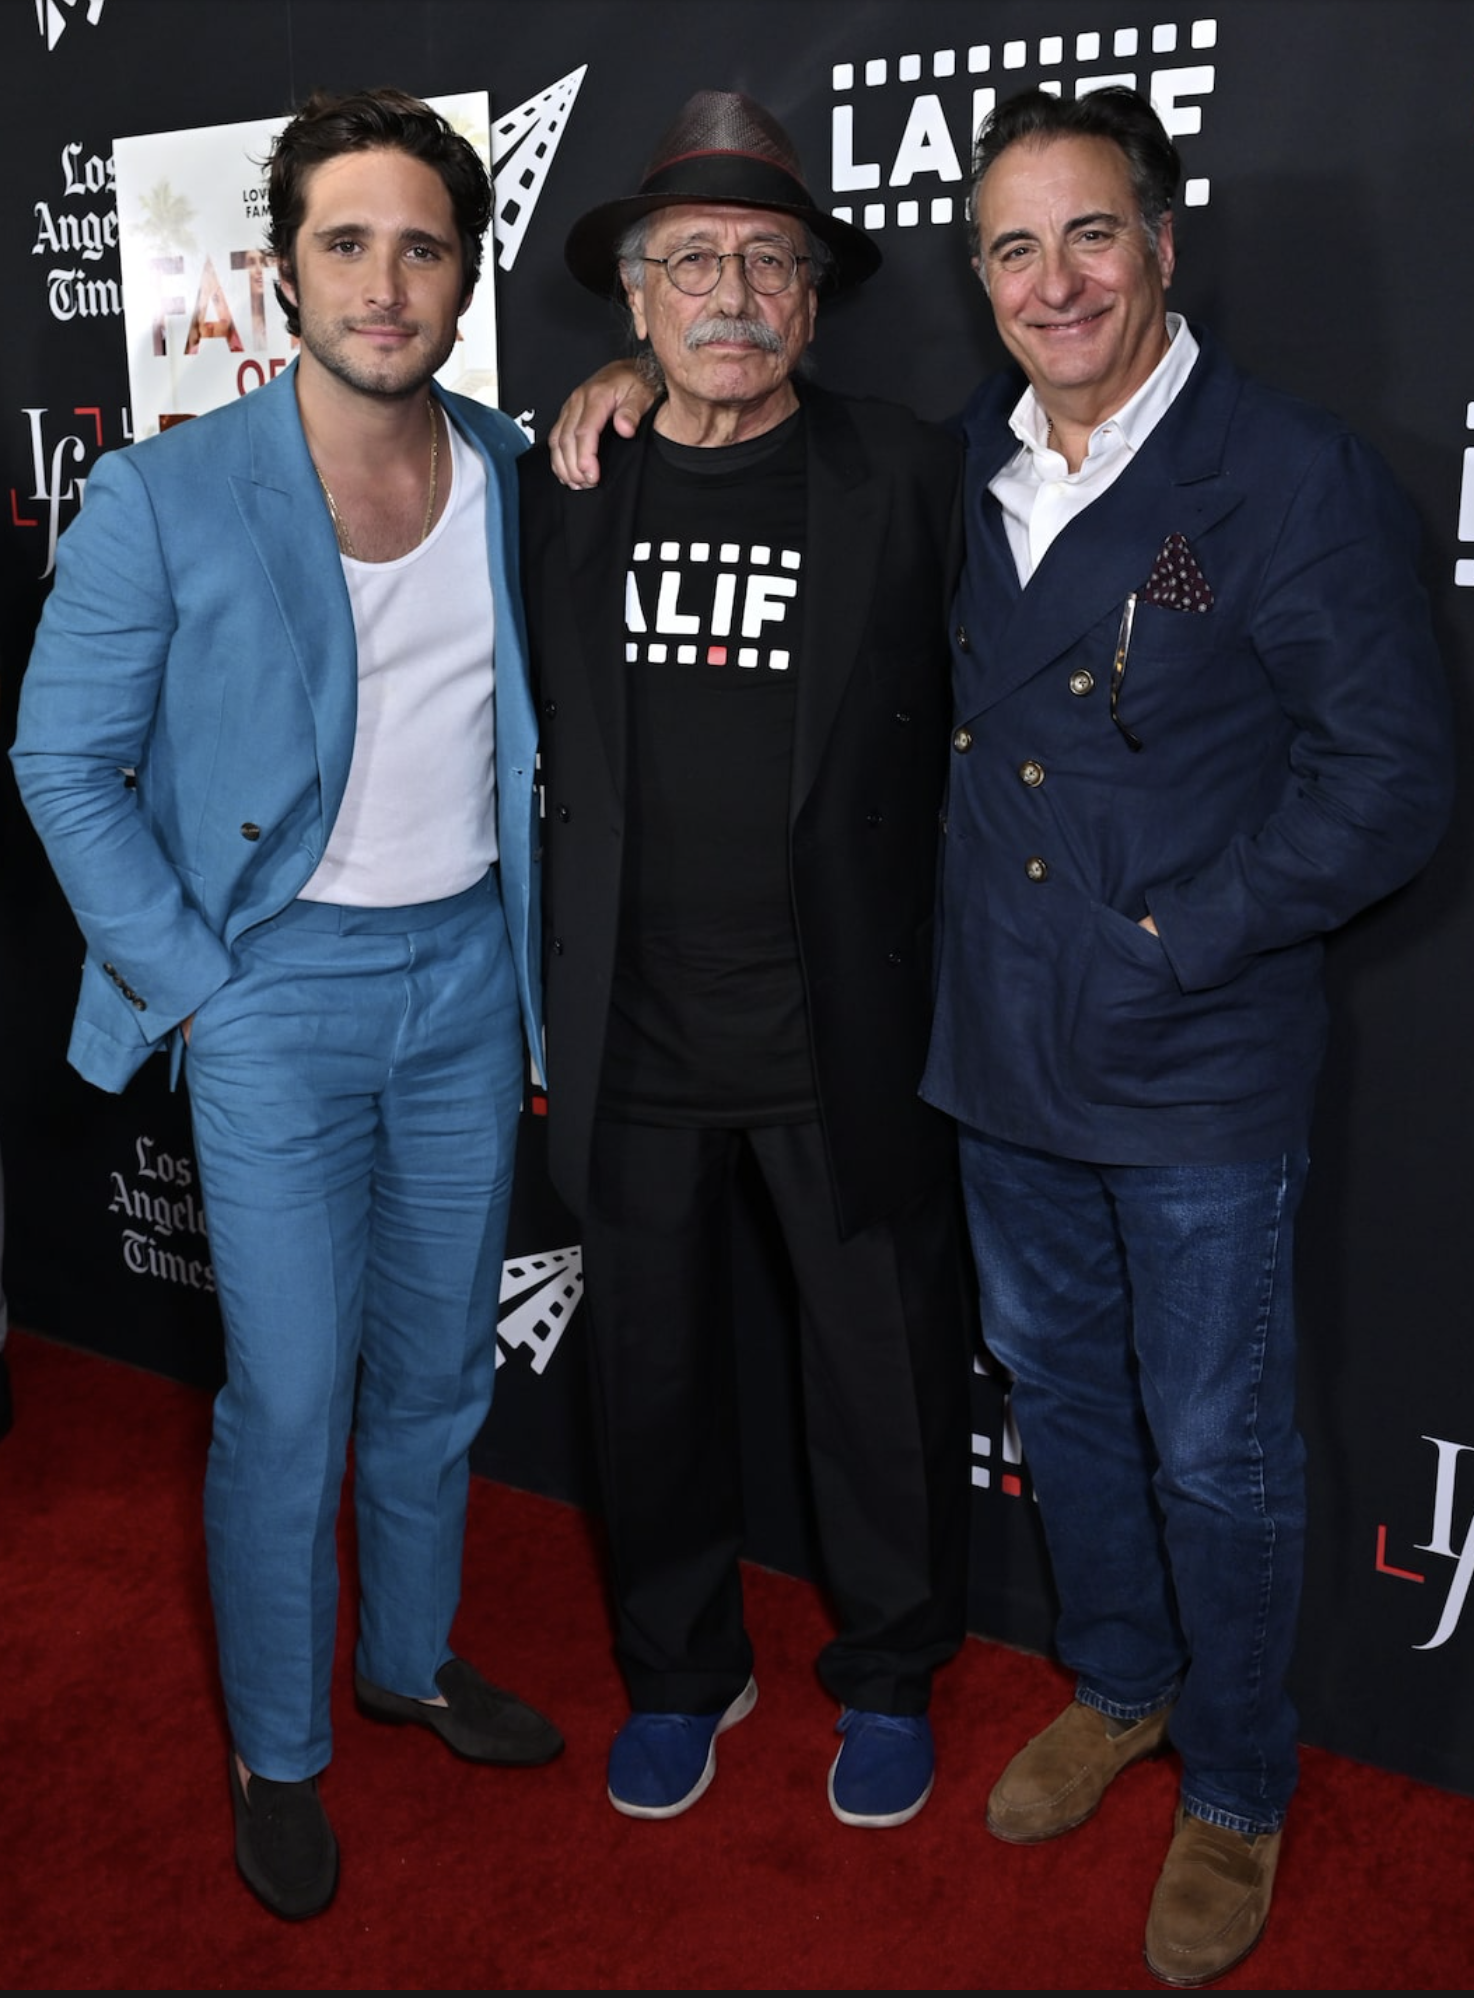 Diego Boneta, Edward James Olmos and Andy Garcia hit the red carpet for LALIFF’s closing-night premiere of “Father of the Bride.”